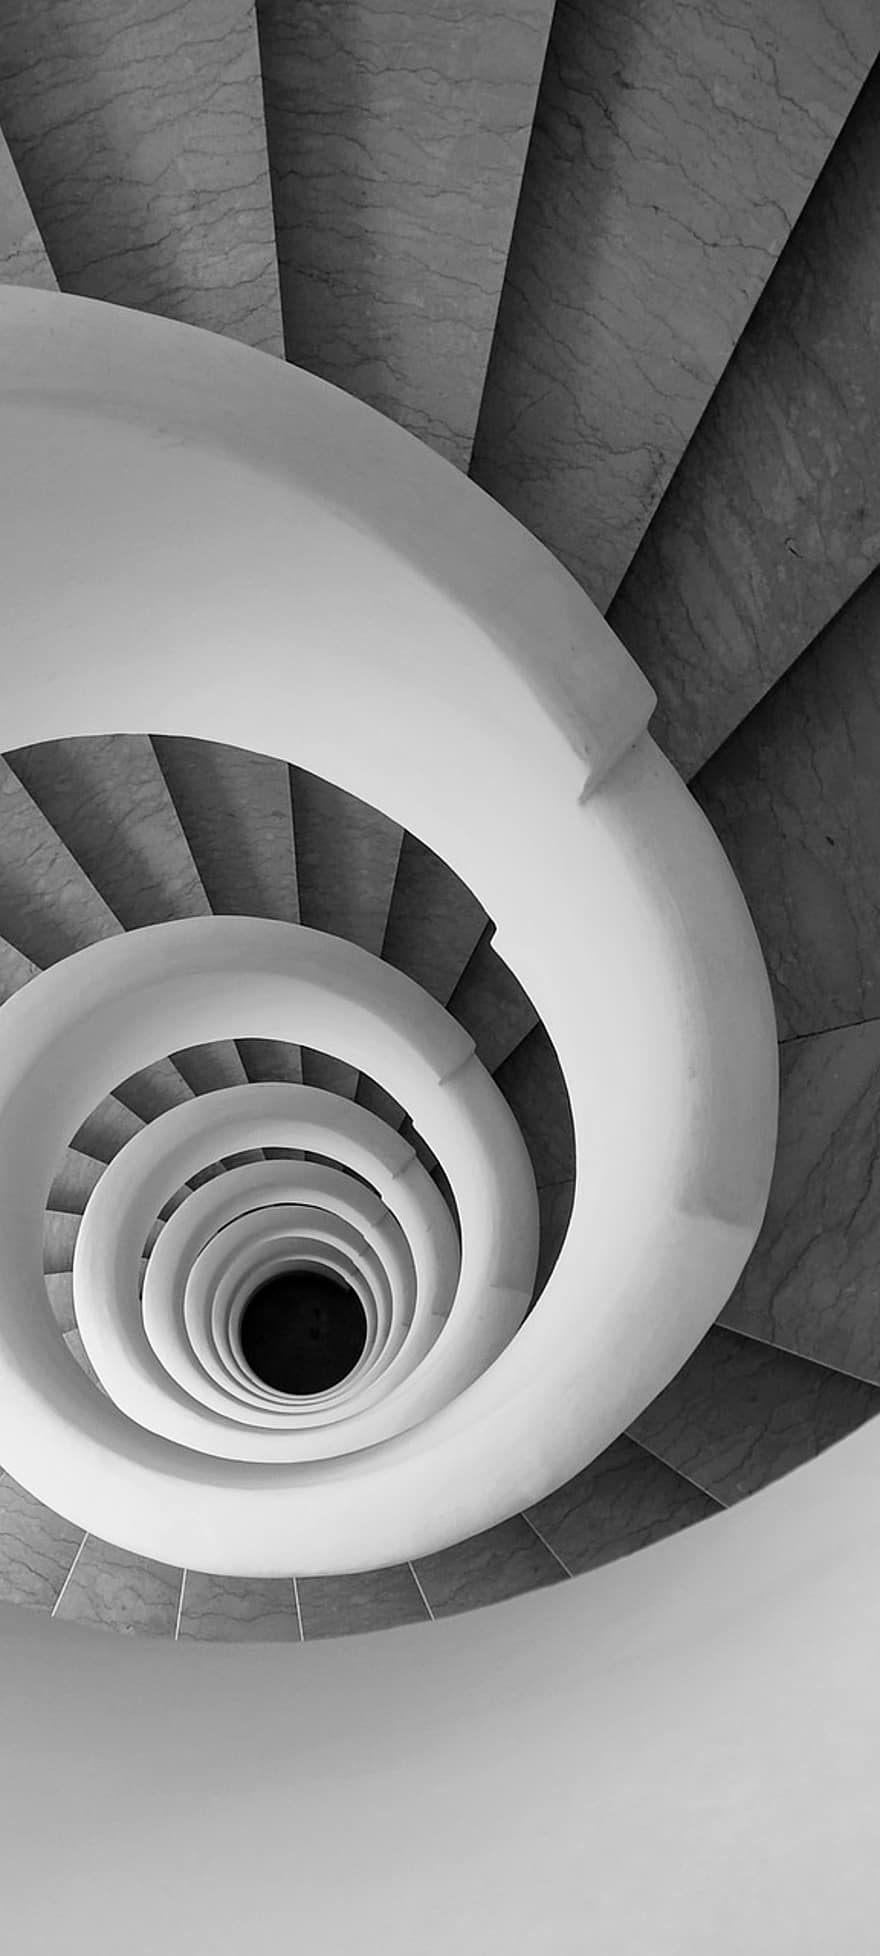 Spiral Staircase, Stairwell, Spiral, Staircase, architecture, indoors, design, modern, abstract, curve, domestic room